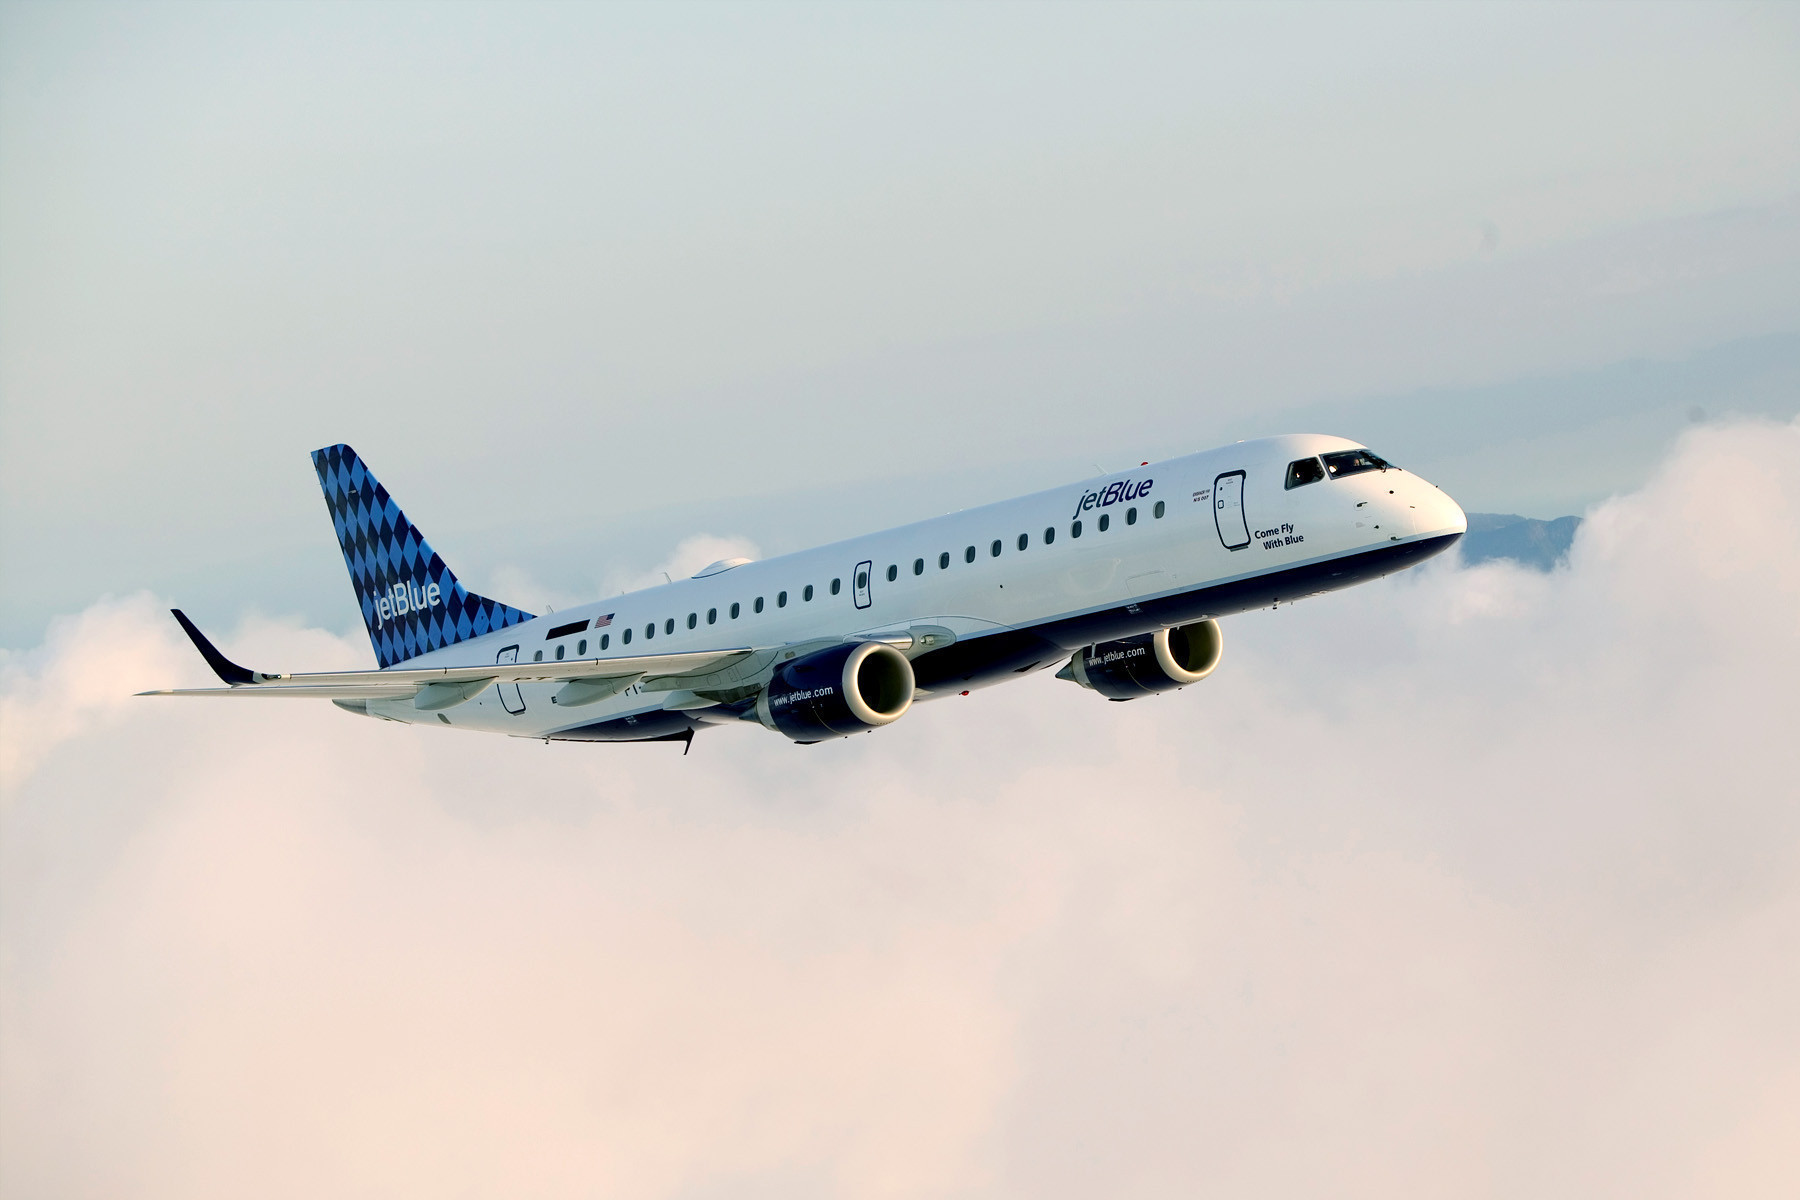 Seattle reservation to call Syracuse flight by